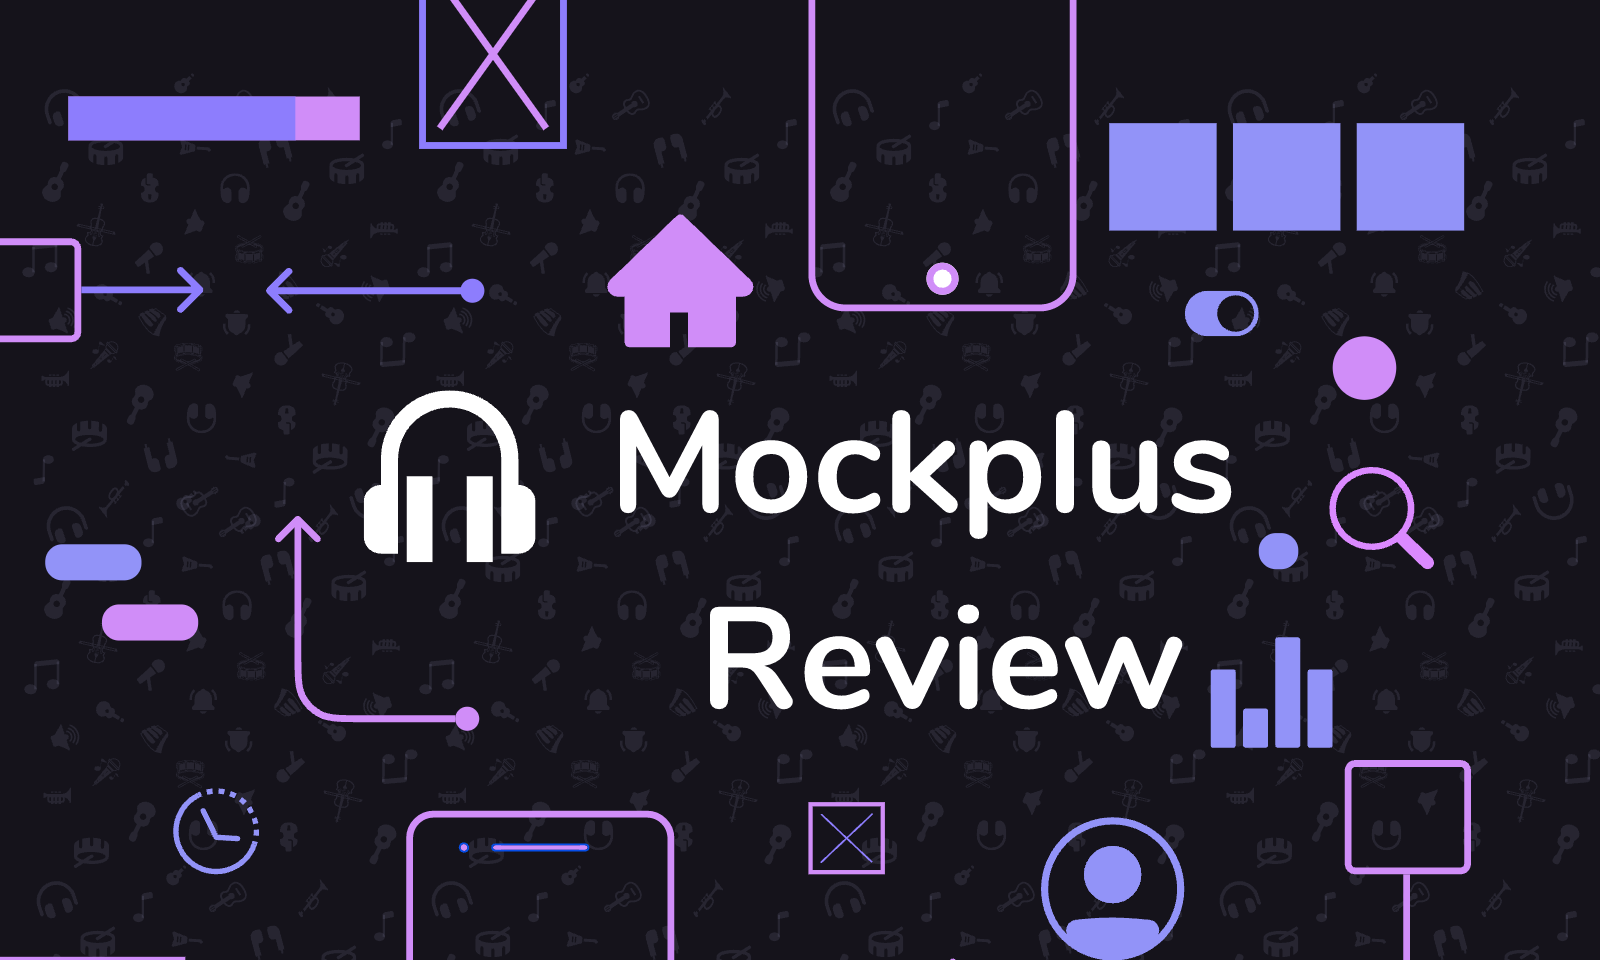  [2022] Mockplus Review: Features, Pricing, and Alternatives